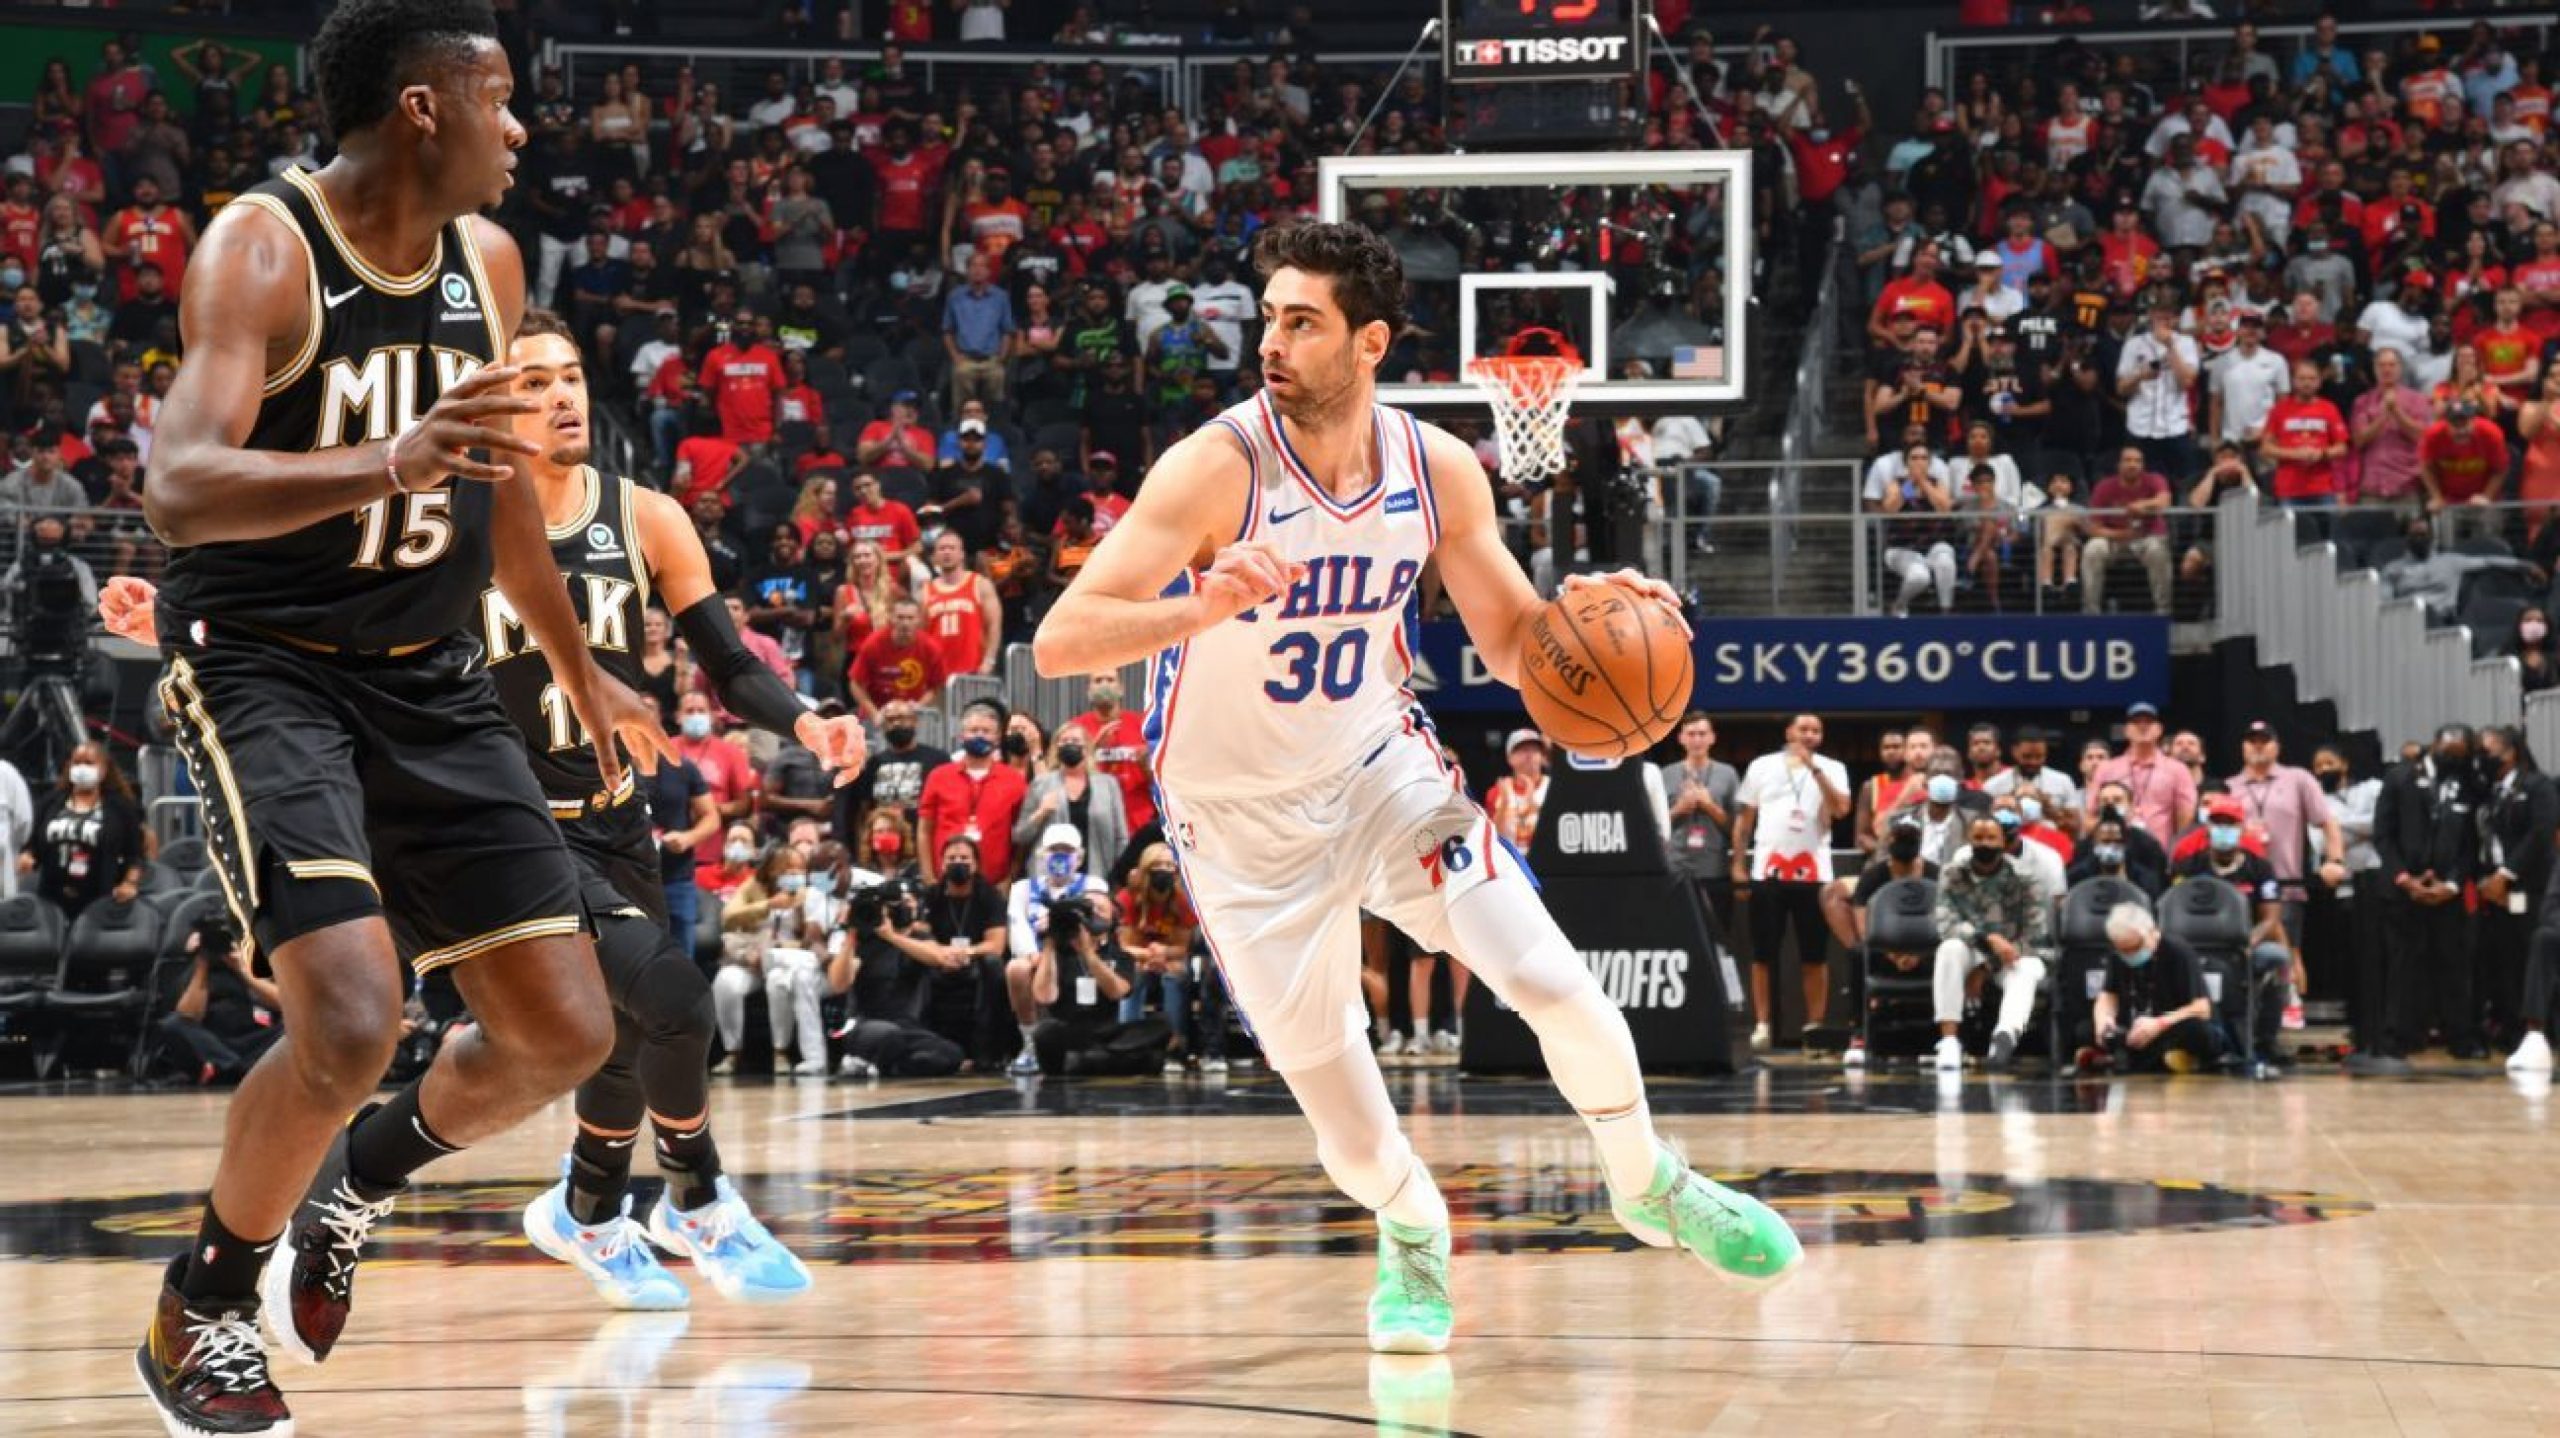 Korkmaz sticking with 76ers on 3-year, $15M deal